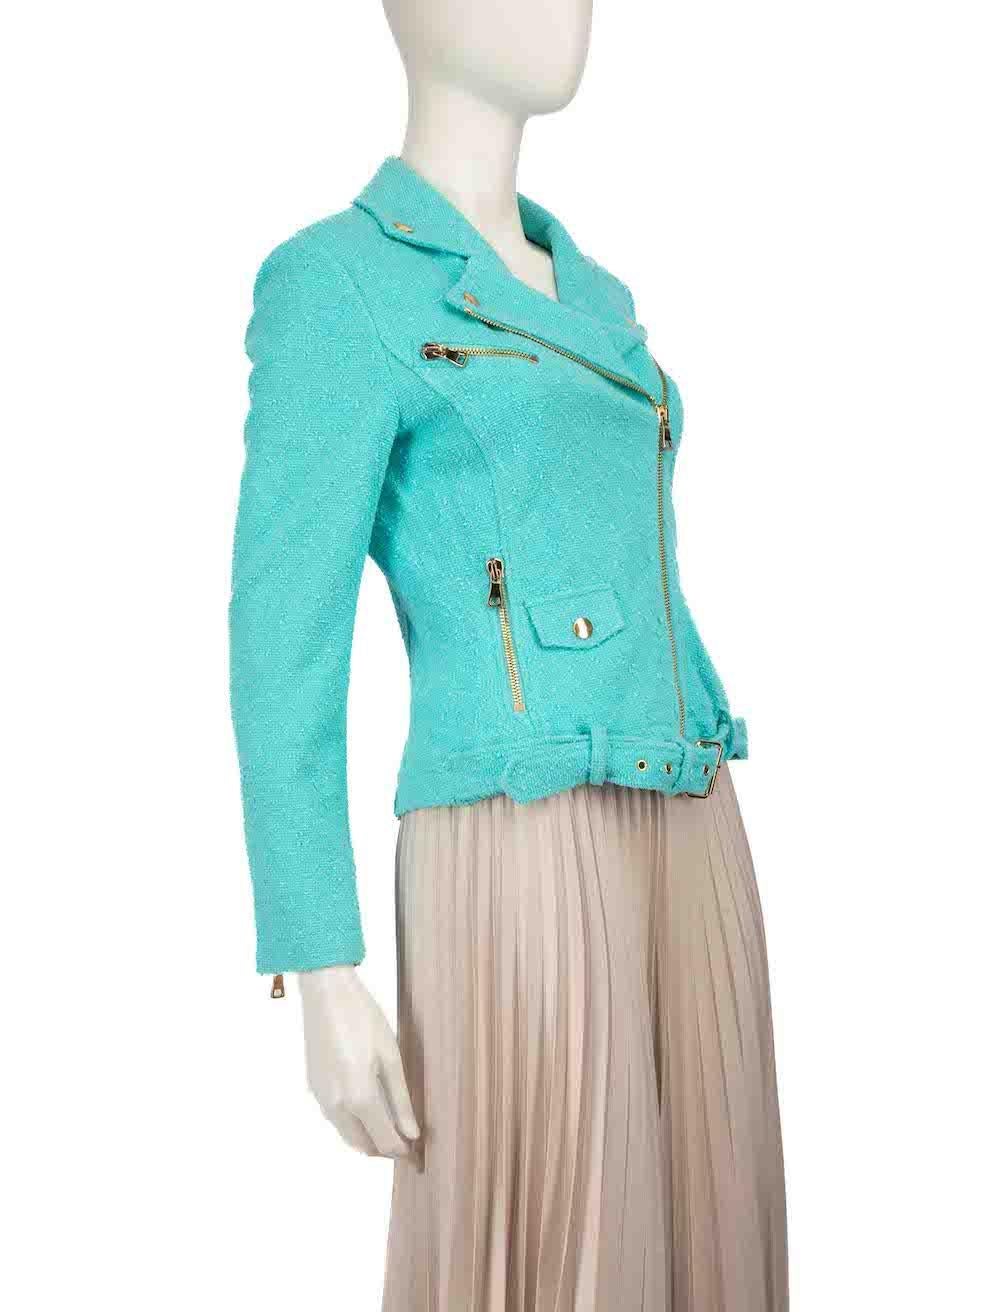 CONDITION is Very good. Hardly any visible wear to the jacket is evident on this used Moschino Cheap And Chic designer resale item.
 
 
 
 Details
 
 
 Blue
 
 Tweed
 
 Biker jacket
 
 Cropped fit
 
 Long sleeves
 
 Zipped cuffs
 
 Gold tone